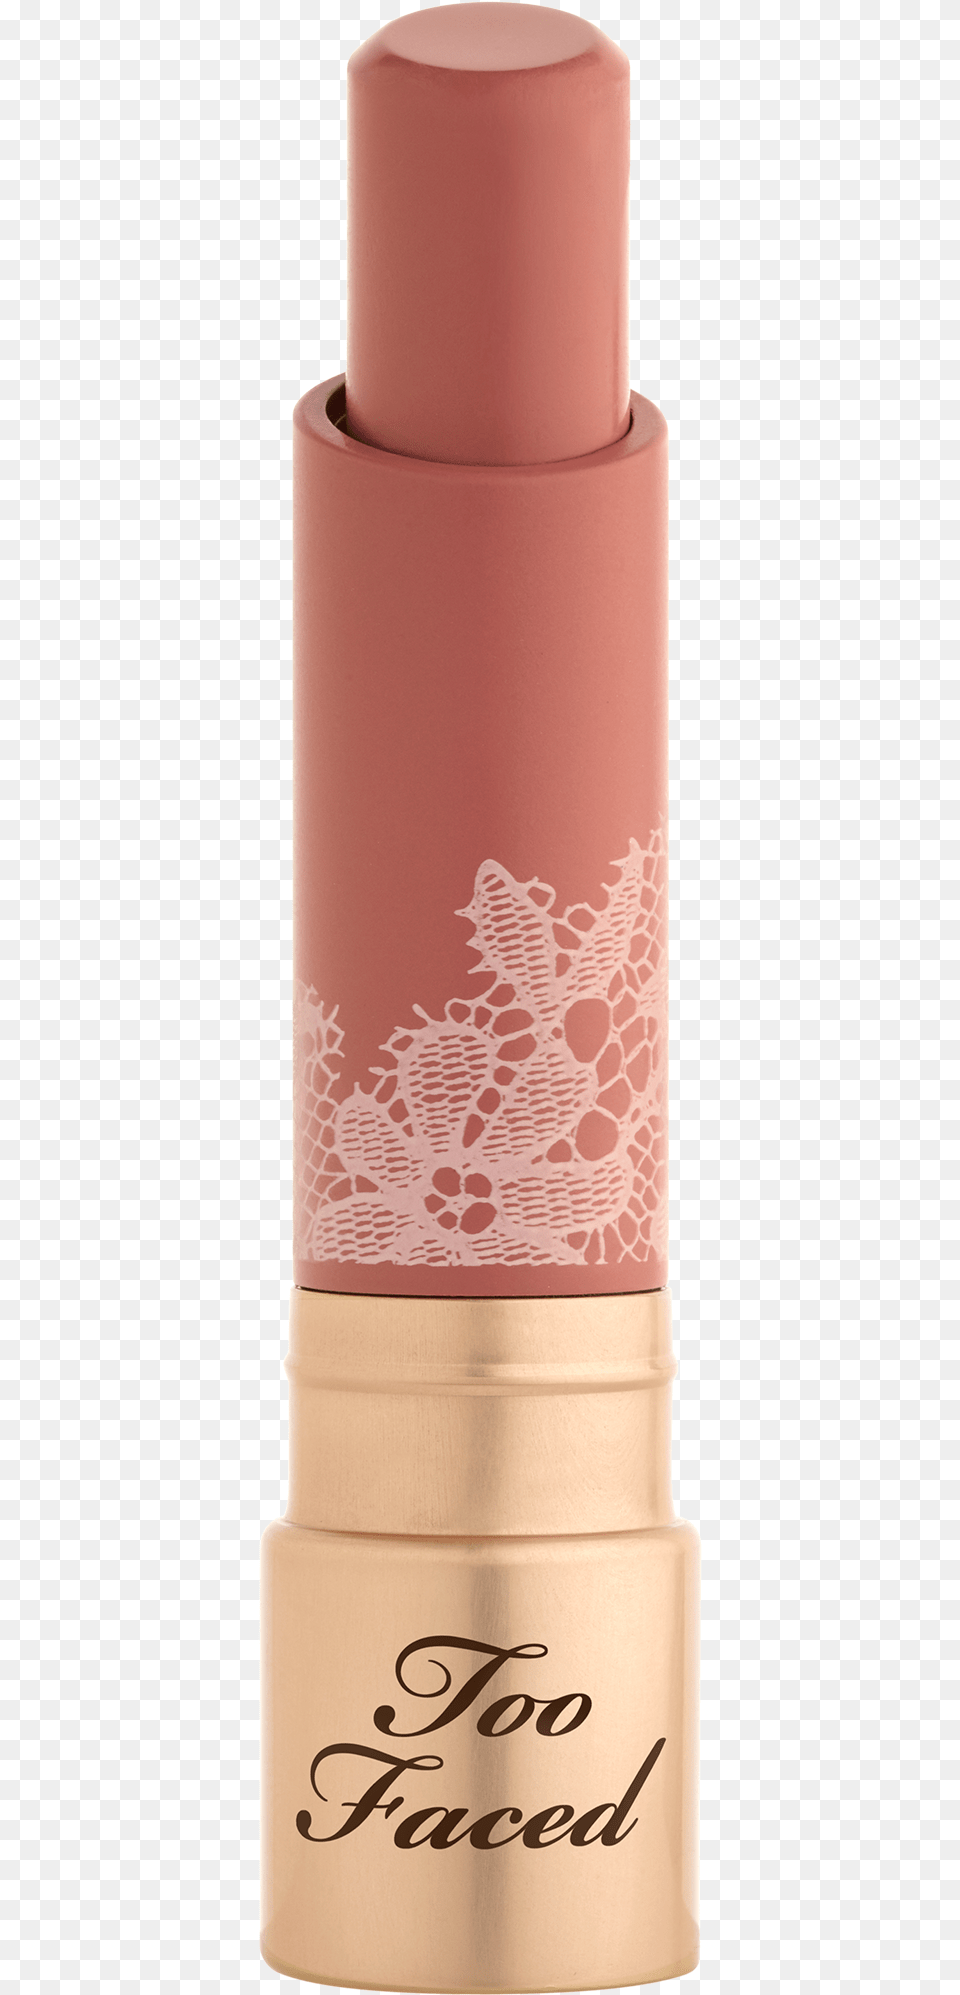 Natural Too Faced, Cosmetics, Lipstick, Tape Free Png